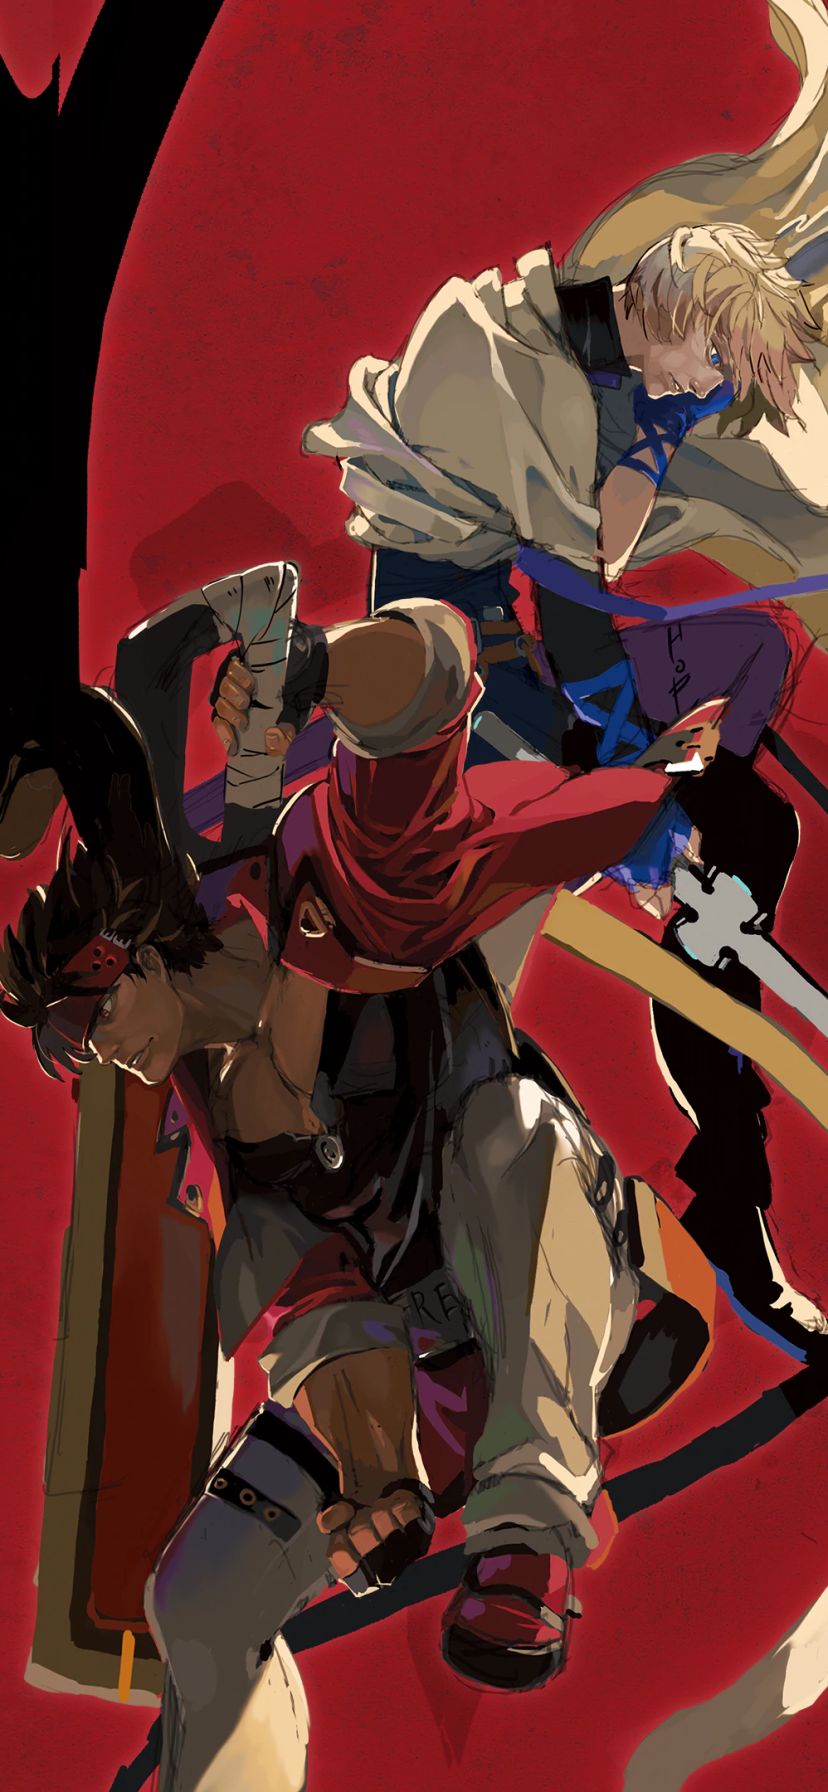 Guilty Gear Strive wallpapers for desktop download free Guilty Gear Strive  pictures and backgrounds for PC  moborg